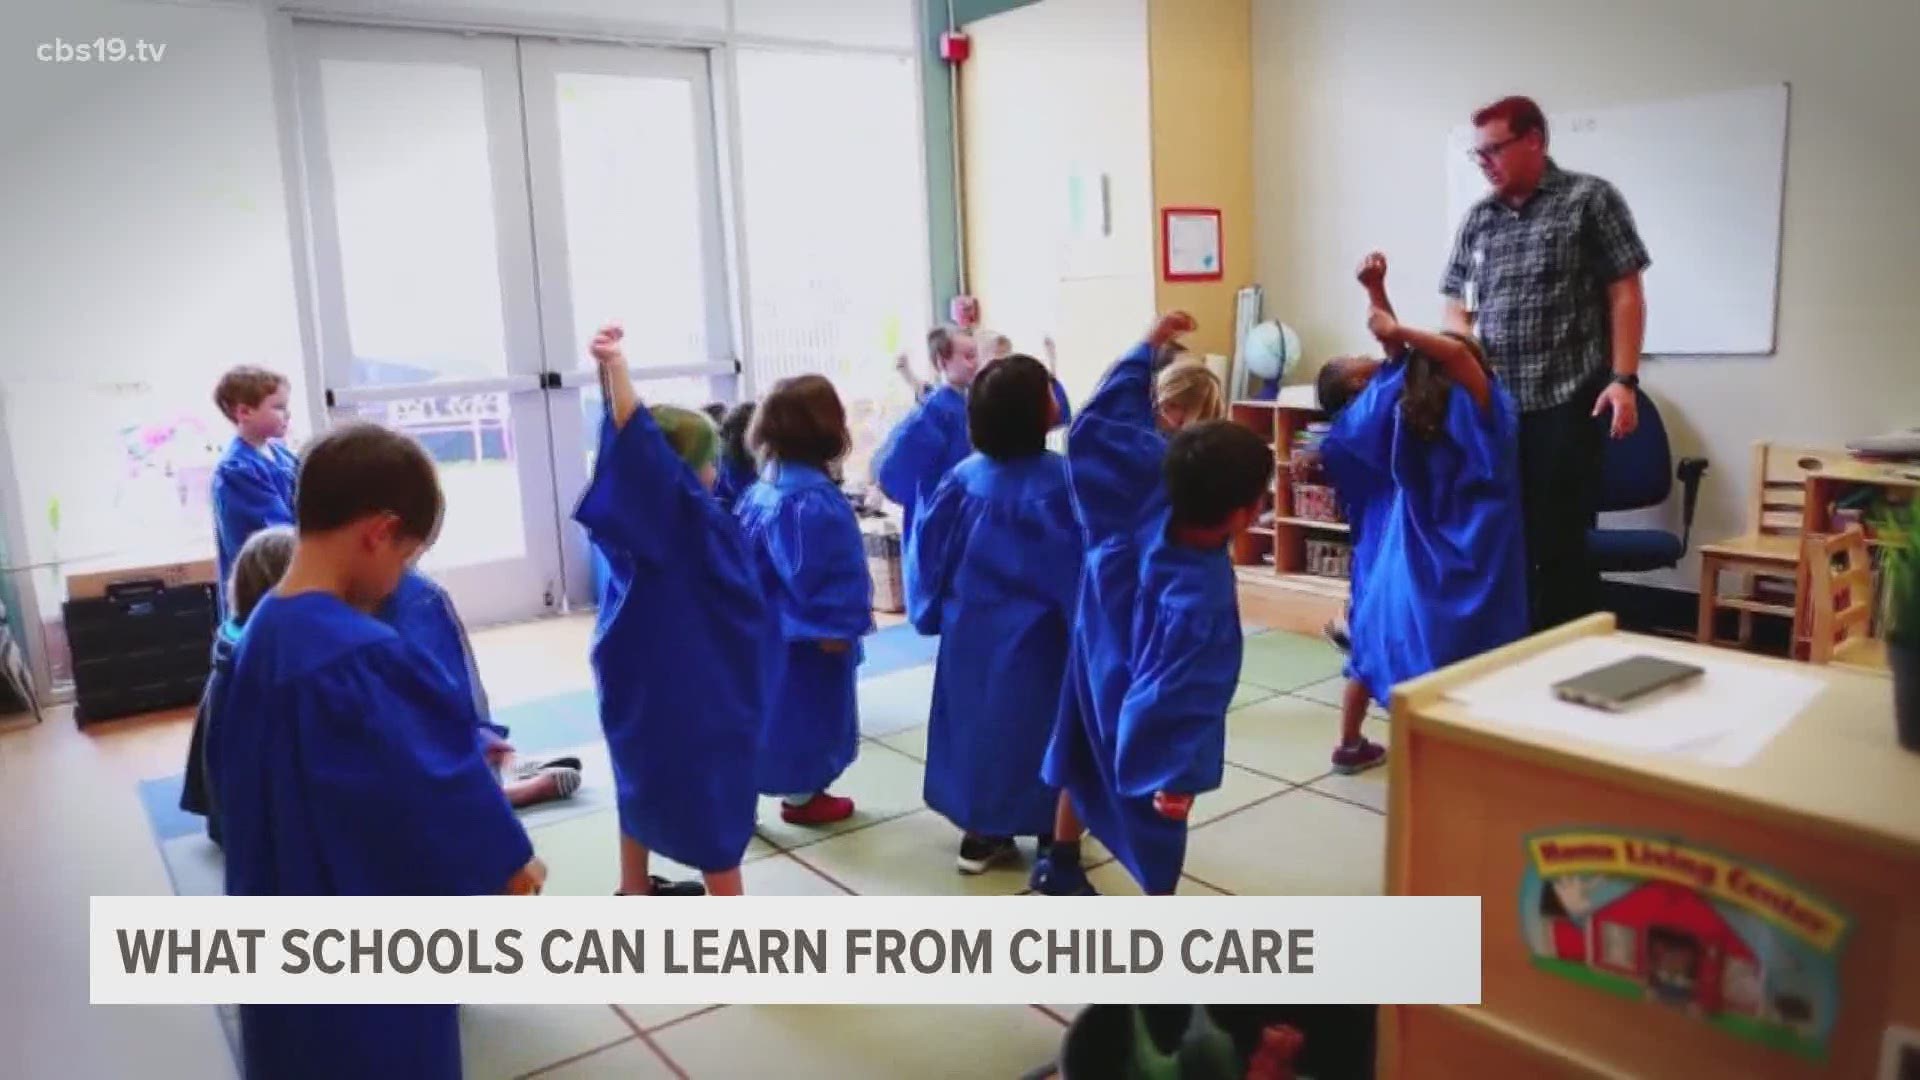 While thousands of children and staff members have gotten COVID-19, most child care centers have had no cases, and some are advising schools on best practices.